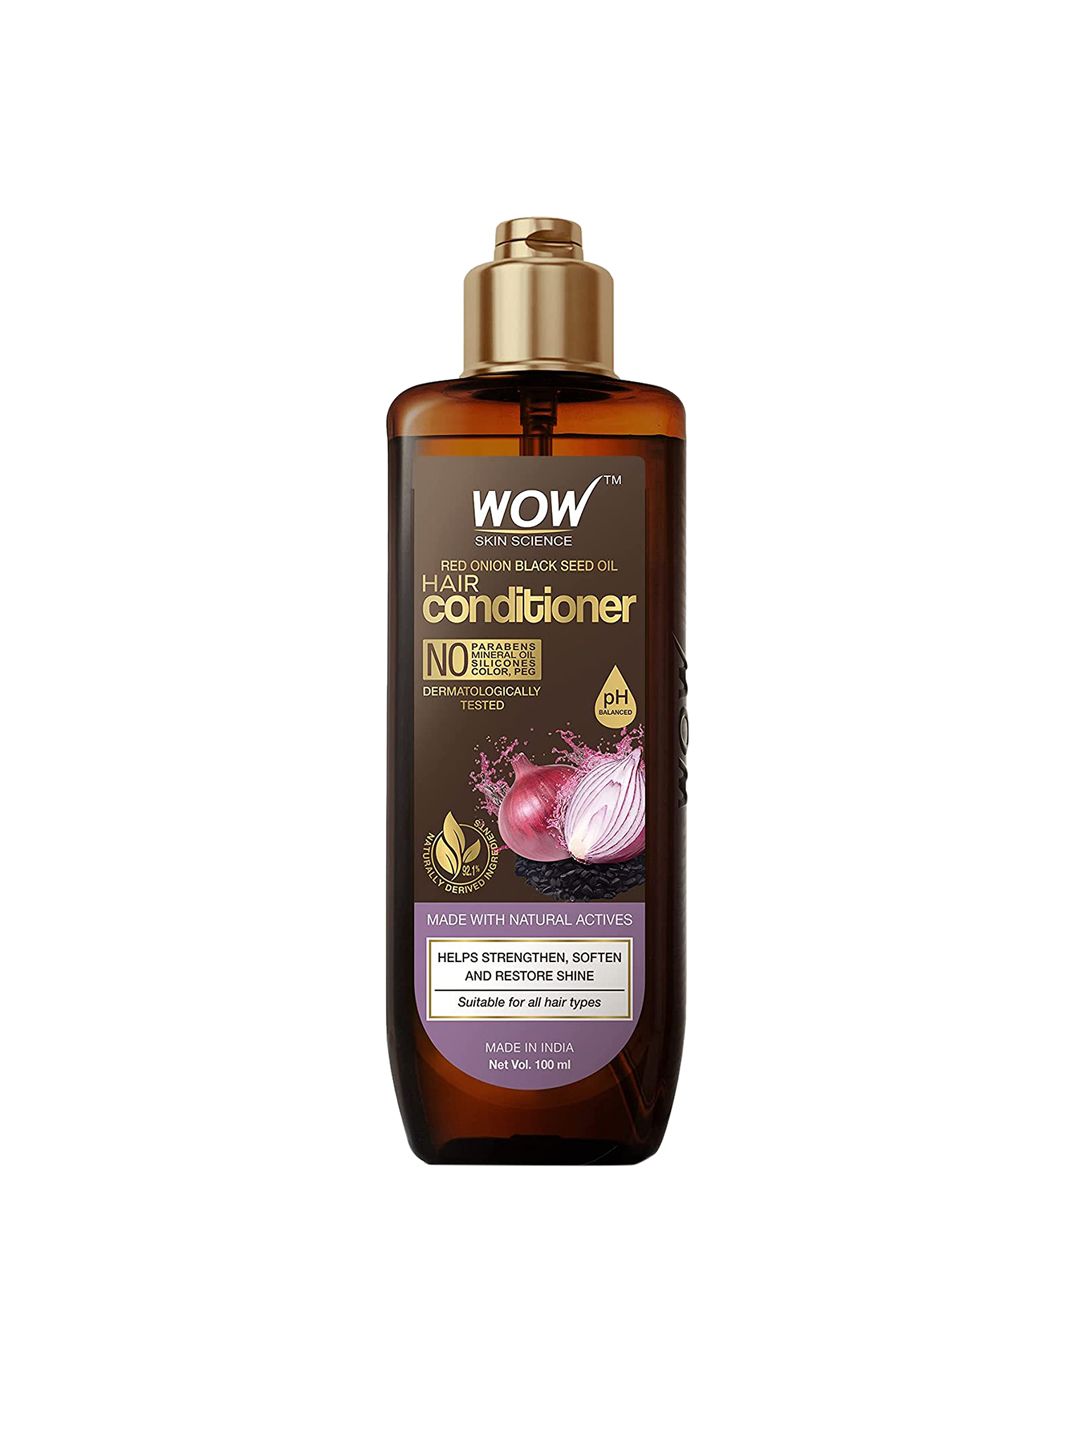 WOW SKIN SCIENCE Red Onion & Black Seed Oil Hair Conditioner - 100 ml Price in India